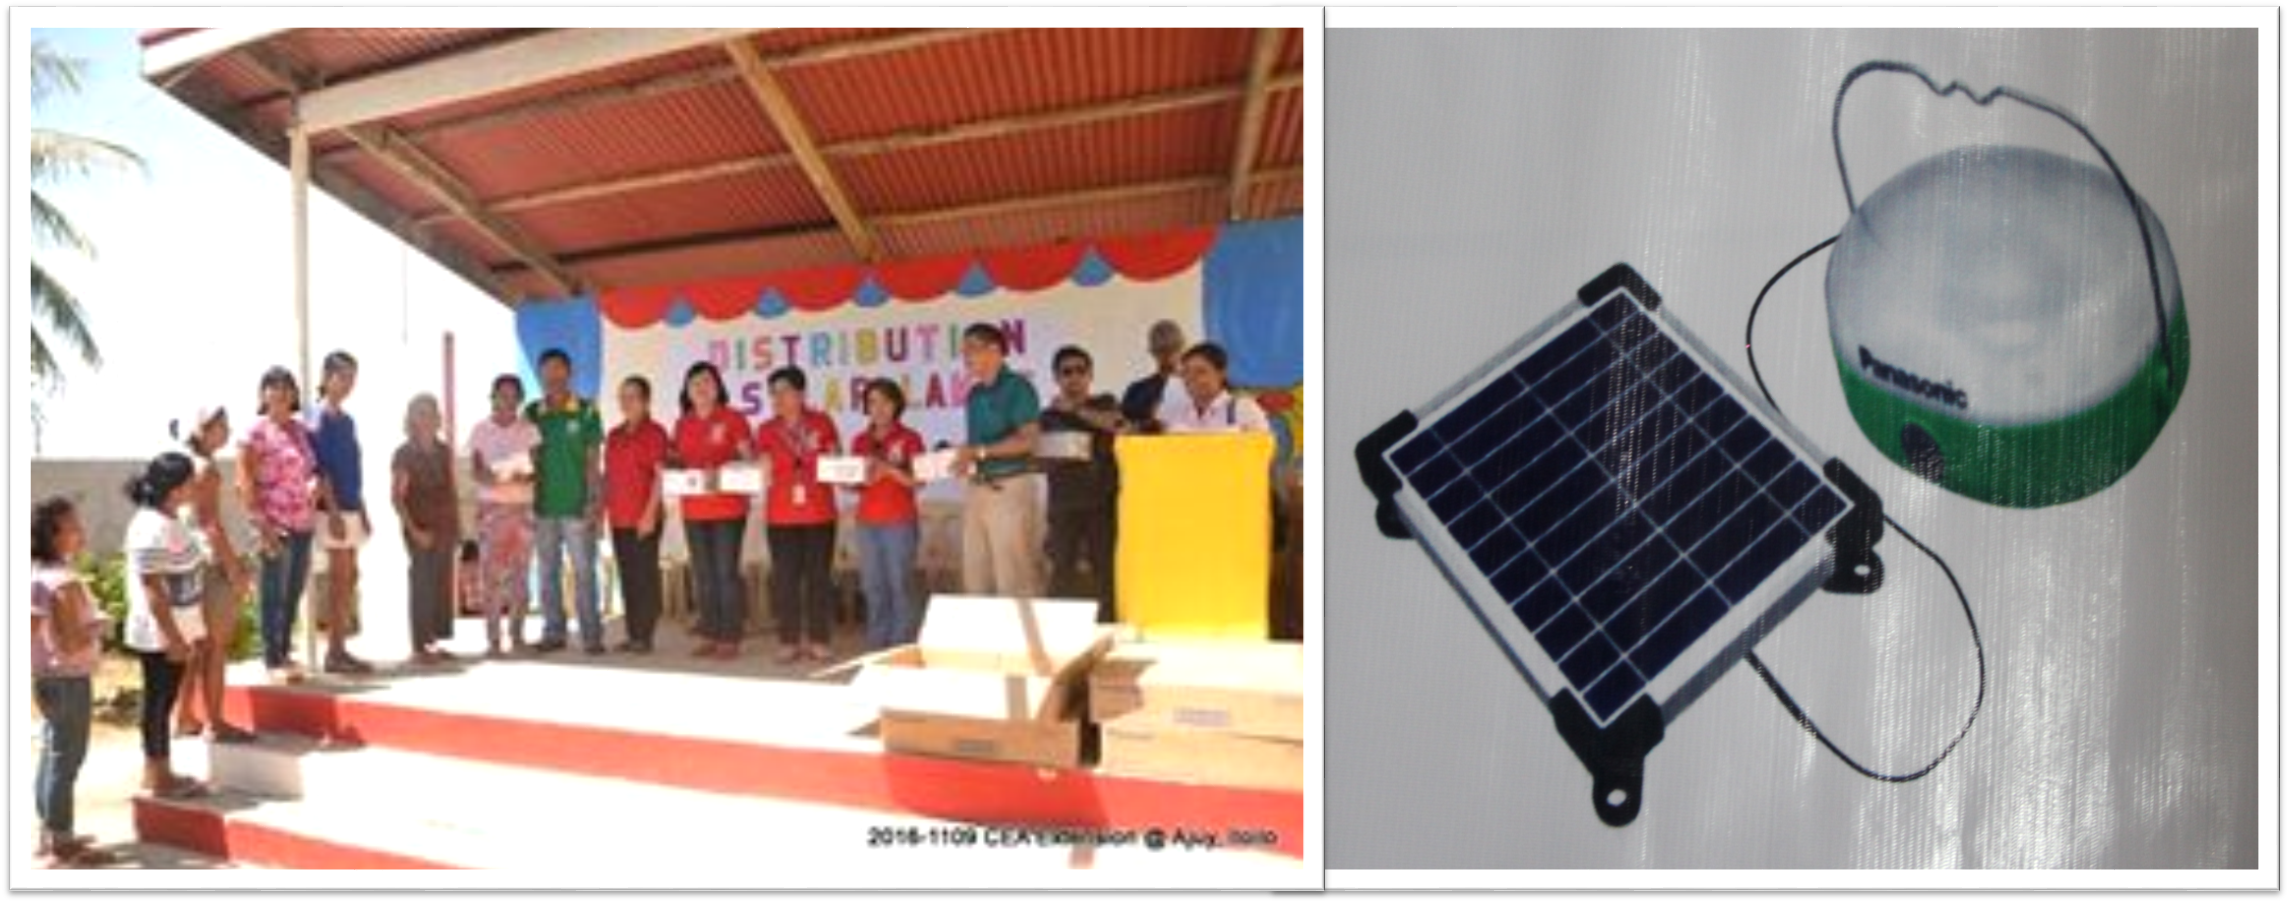 The beneficiaries receives the solar lamps (right). The solar lamps are equipped with solar panel that can generate power for lighting and charging of handheld gadgets.